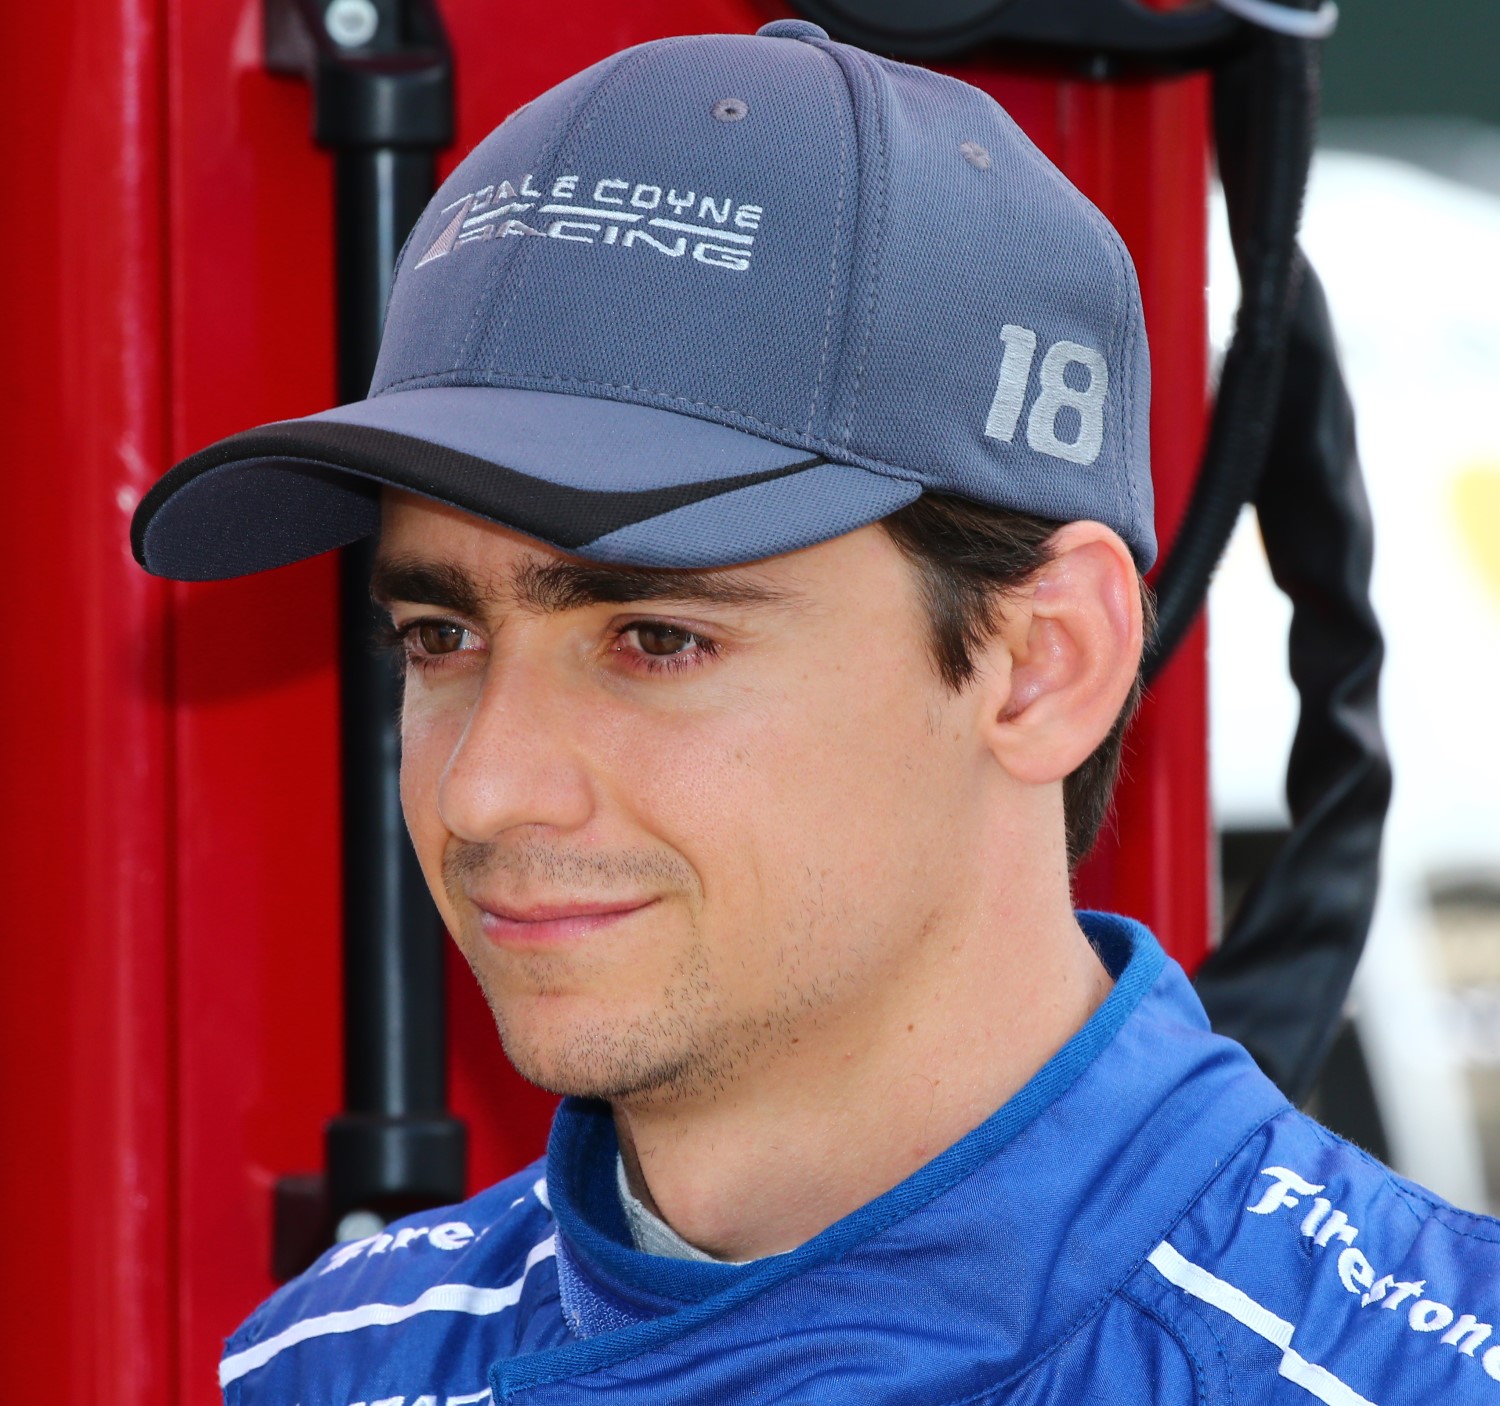 Esteban Gutierrez was slow in F1 and IndyCar. He will have to buy his ride with a big check